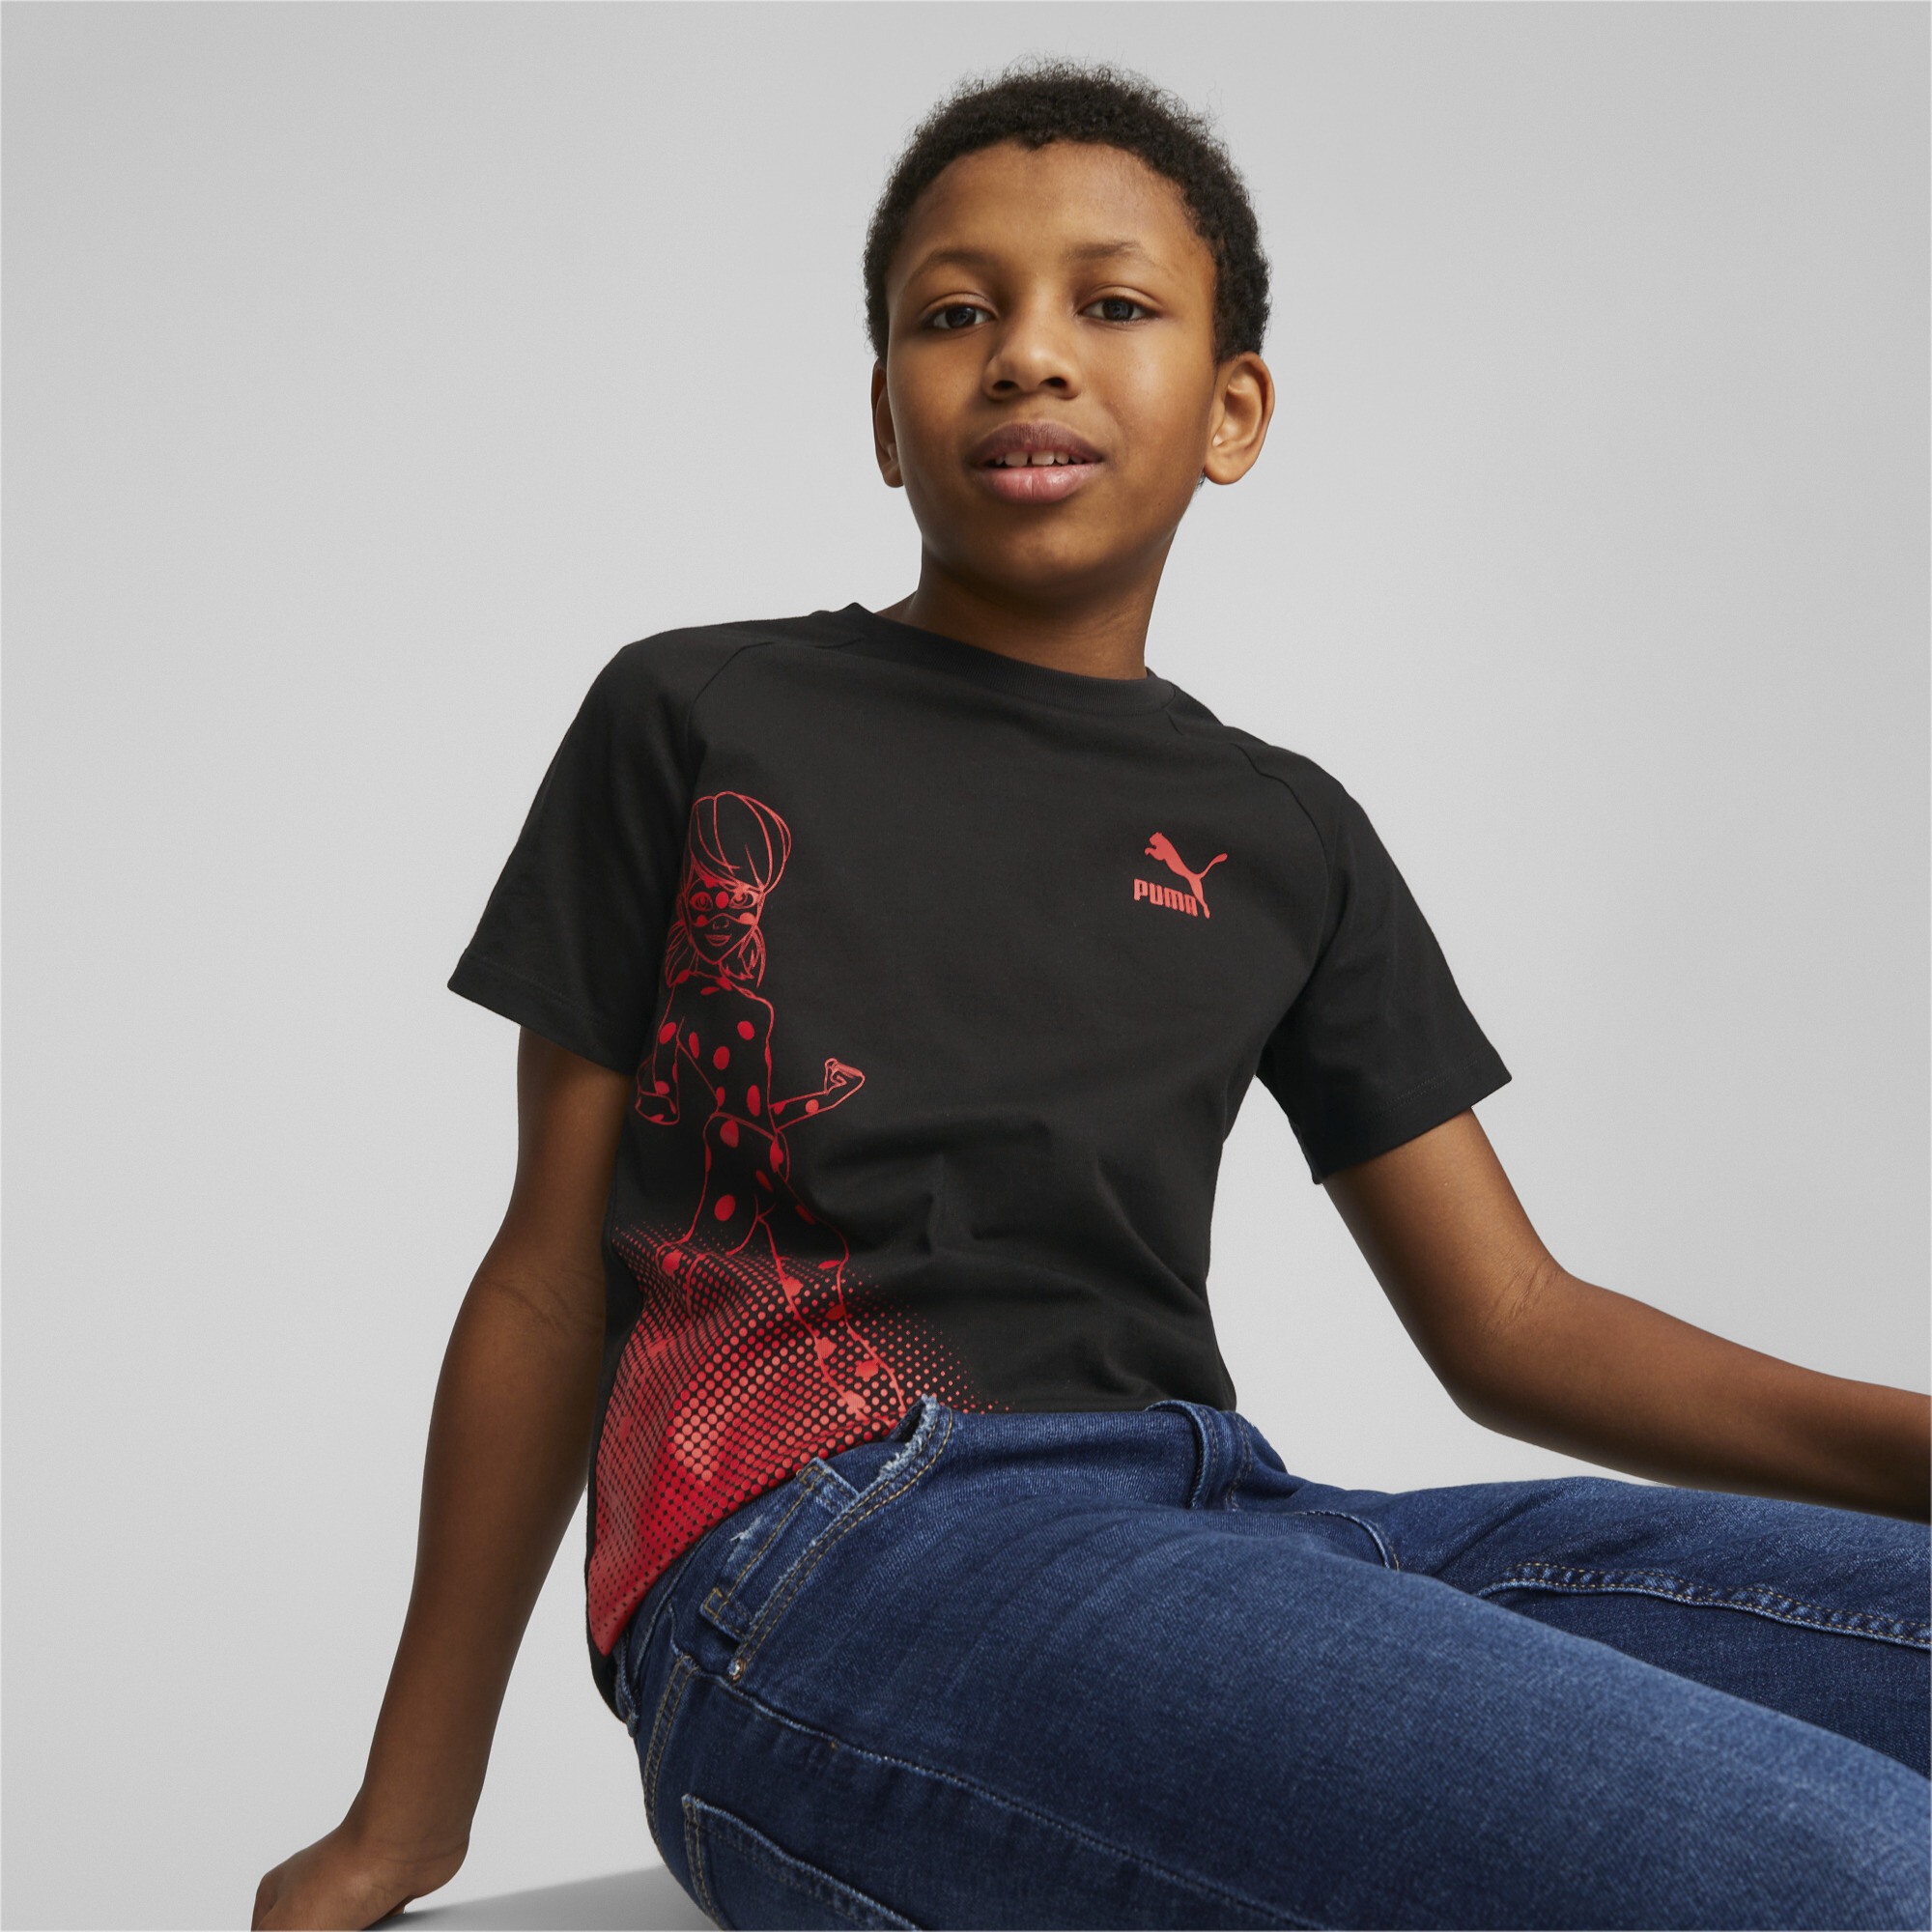 Puma X MIRACULOUS Tee Youth, Black, Size 7-8Y, Clothing